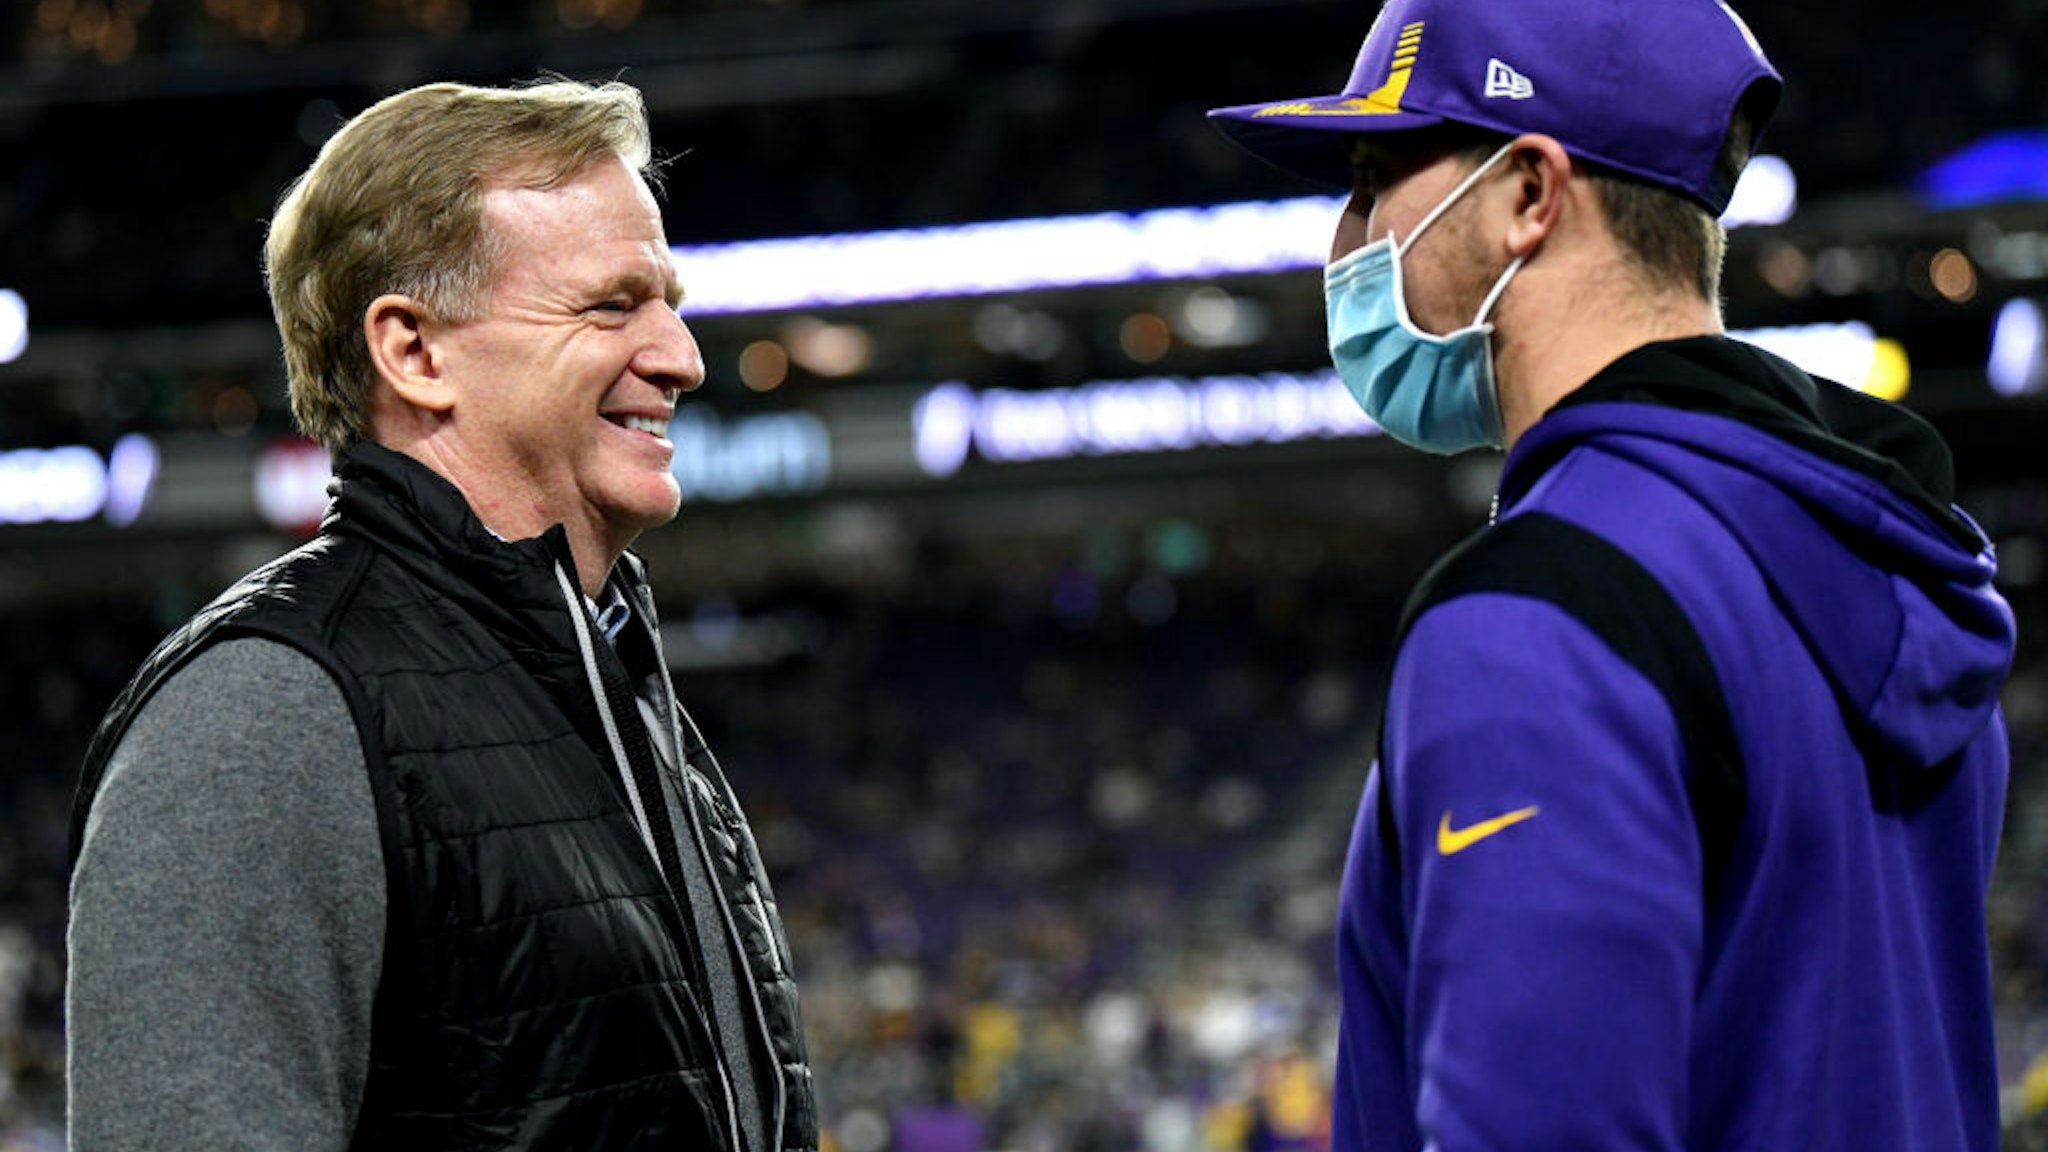 MINNEAPOLIS, MINNESOTA - DECEMBER 09: Adam Thielen #19 of the Minnesota Vikings talks with NFL Commissioner Roger Goodell on the sidelines before the game against the Pittsburgh Steelers at U.S. Bank Stadium on December 09, 2021 in Minneapolis, Minnesota. (Photo by Stephen Maturen/Getty Images)